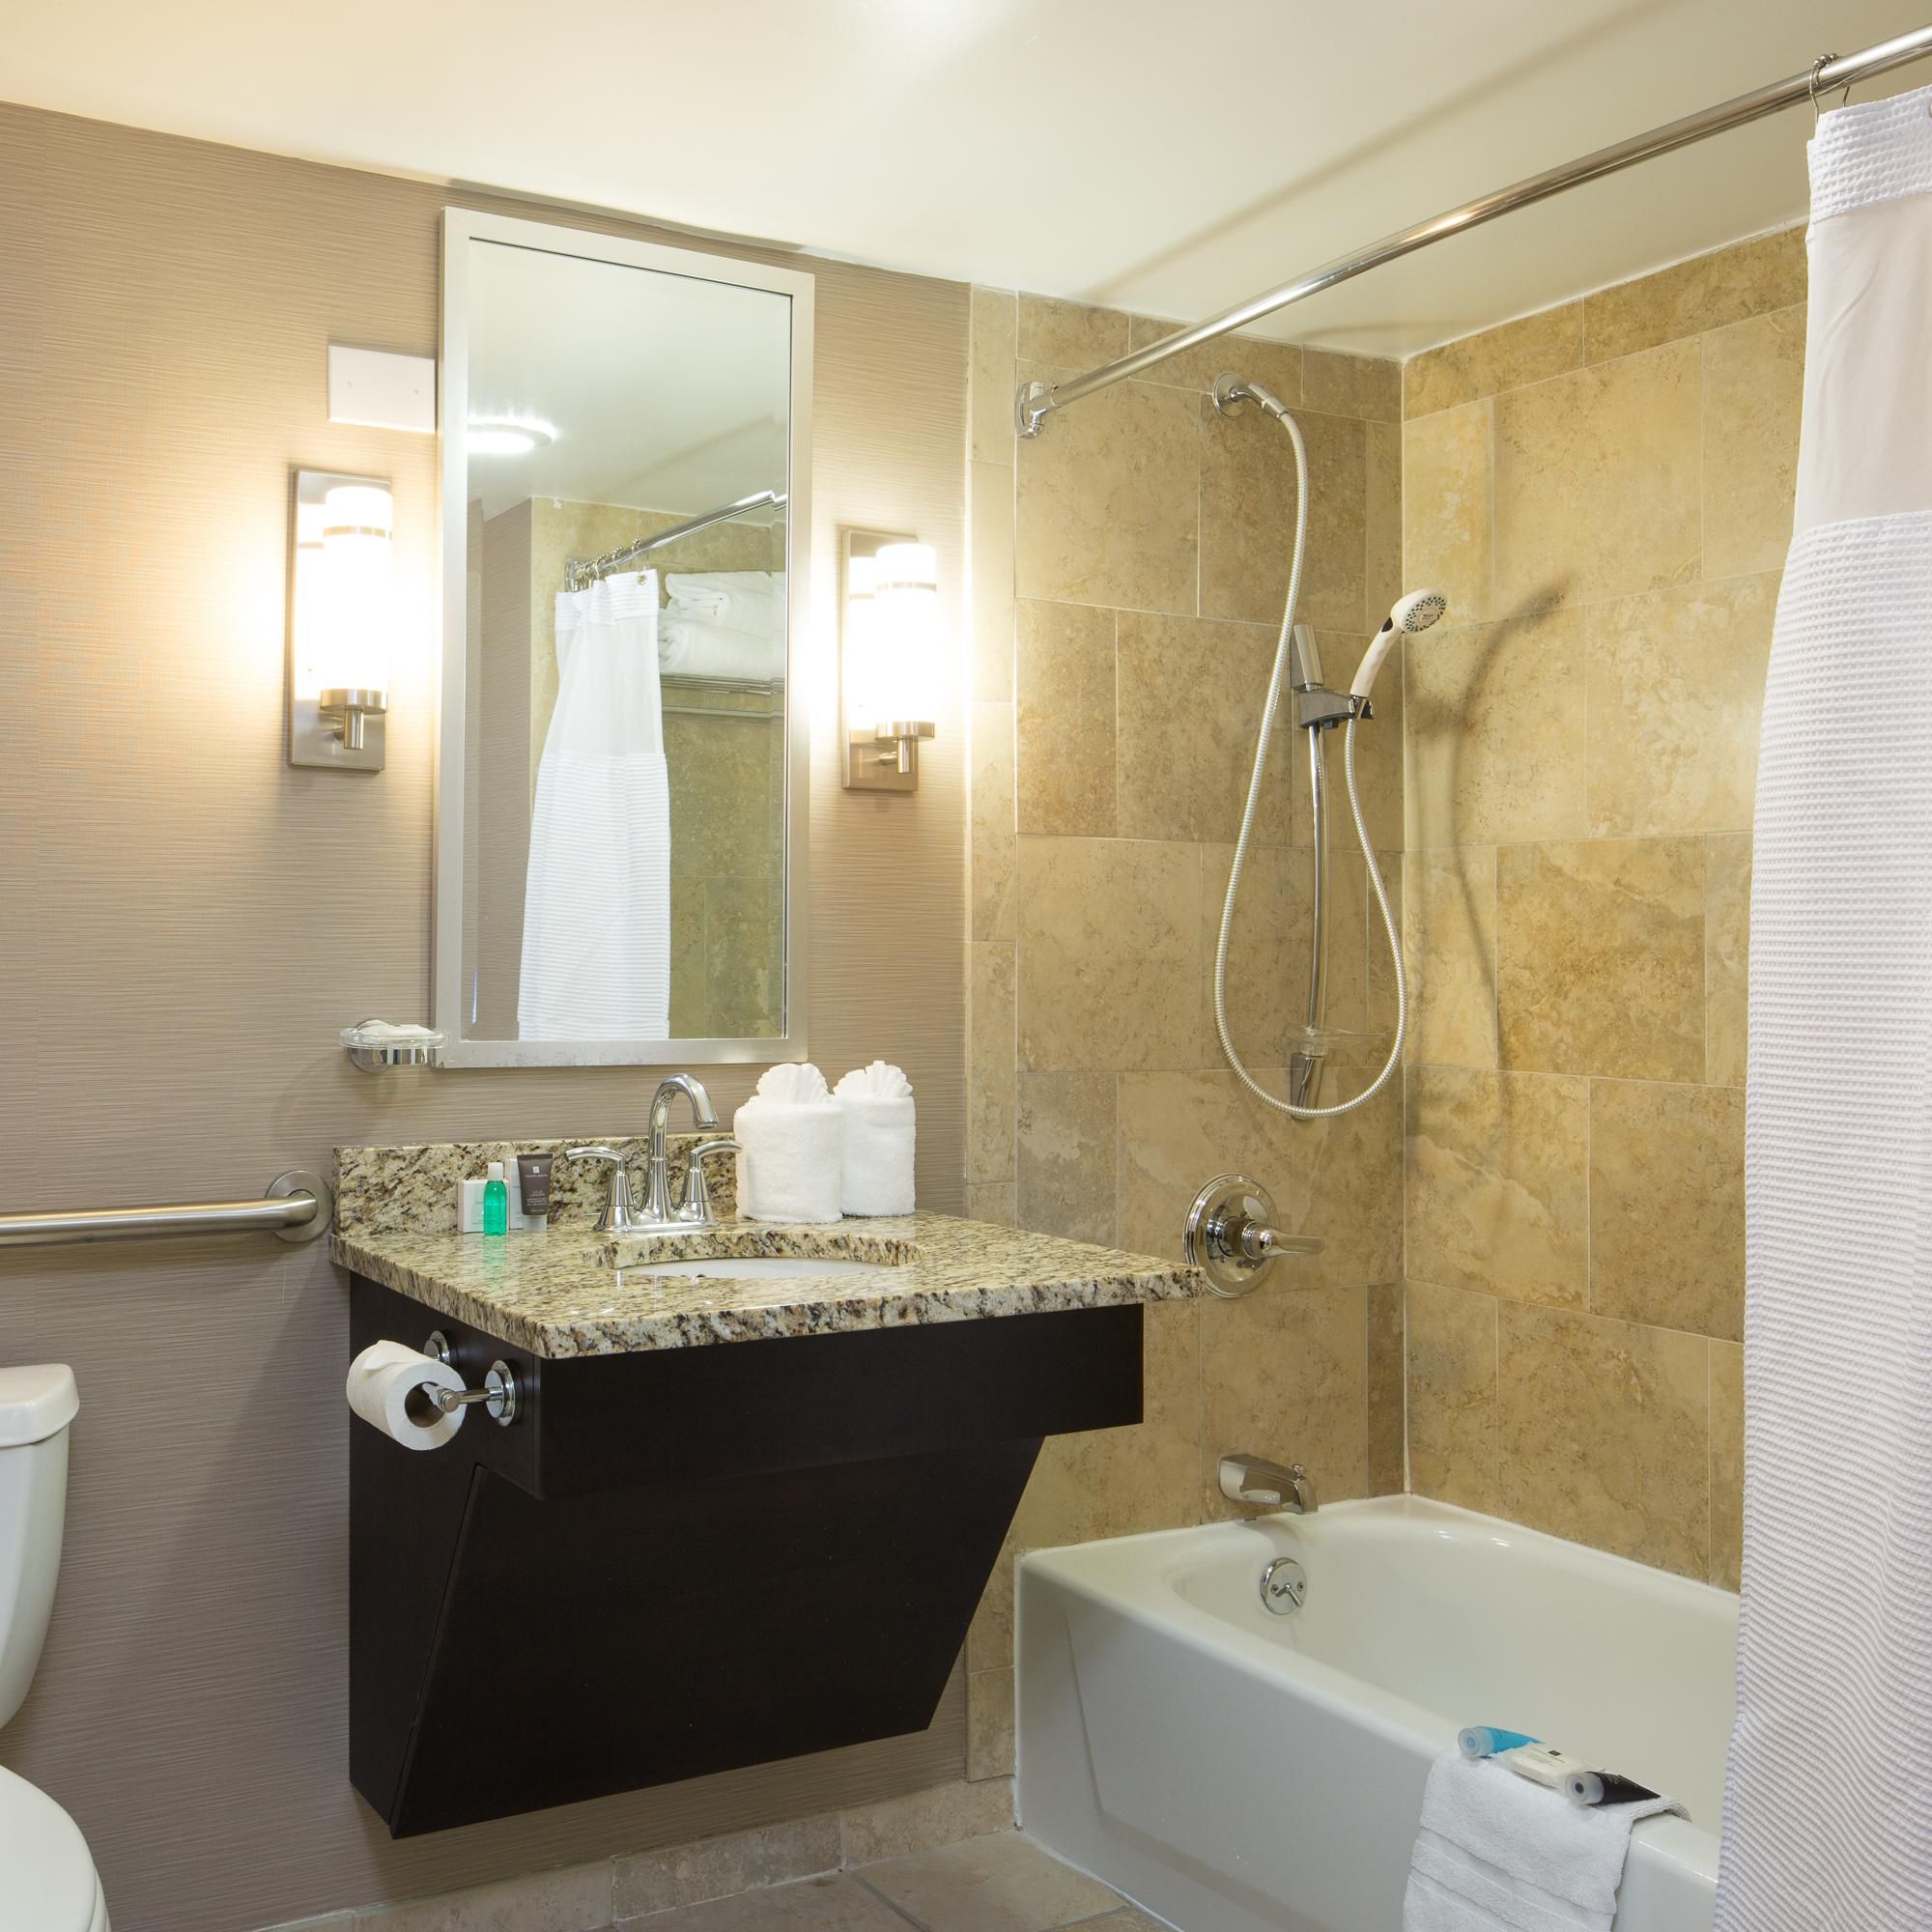 Our downtown Memphis hotel offers ADA accessible rooms